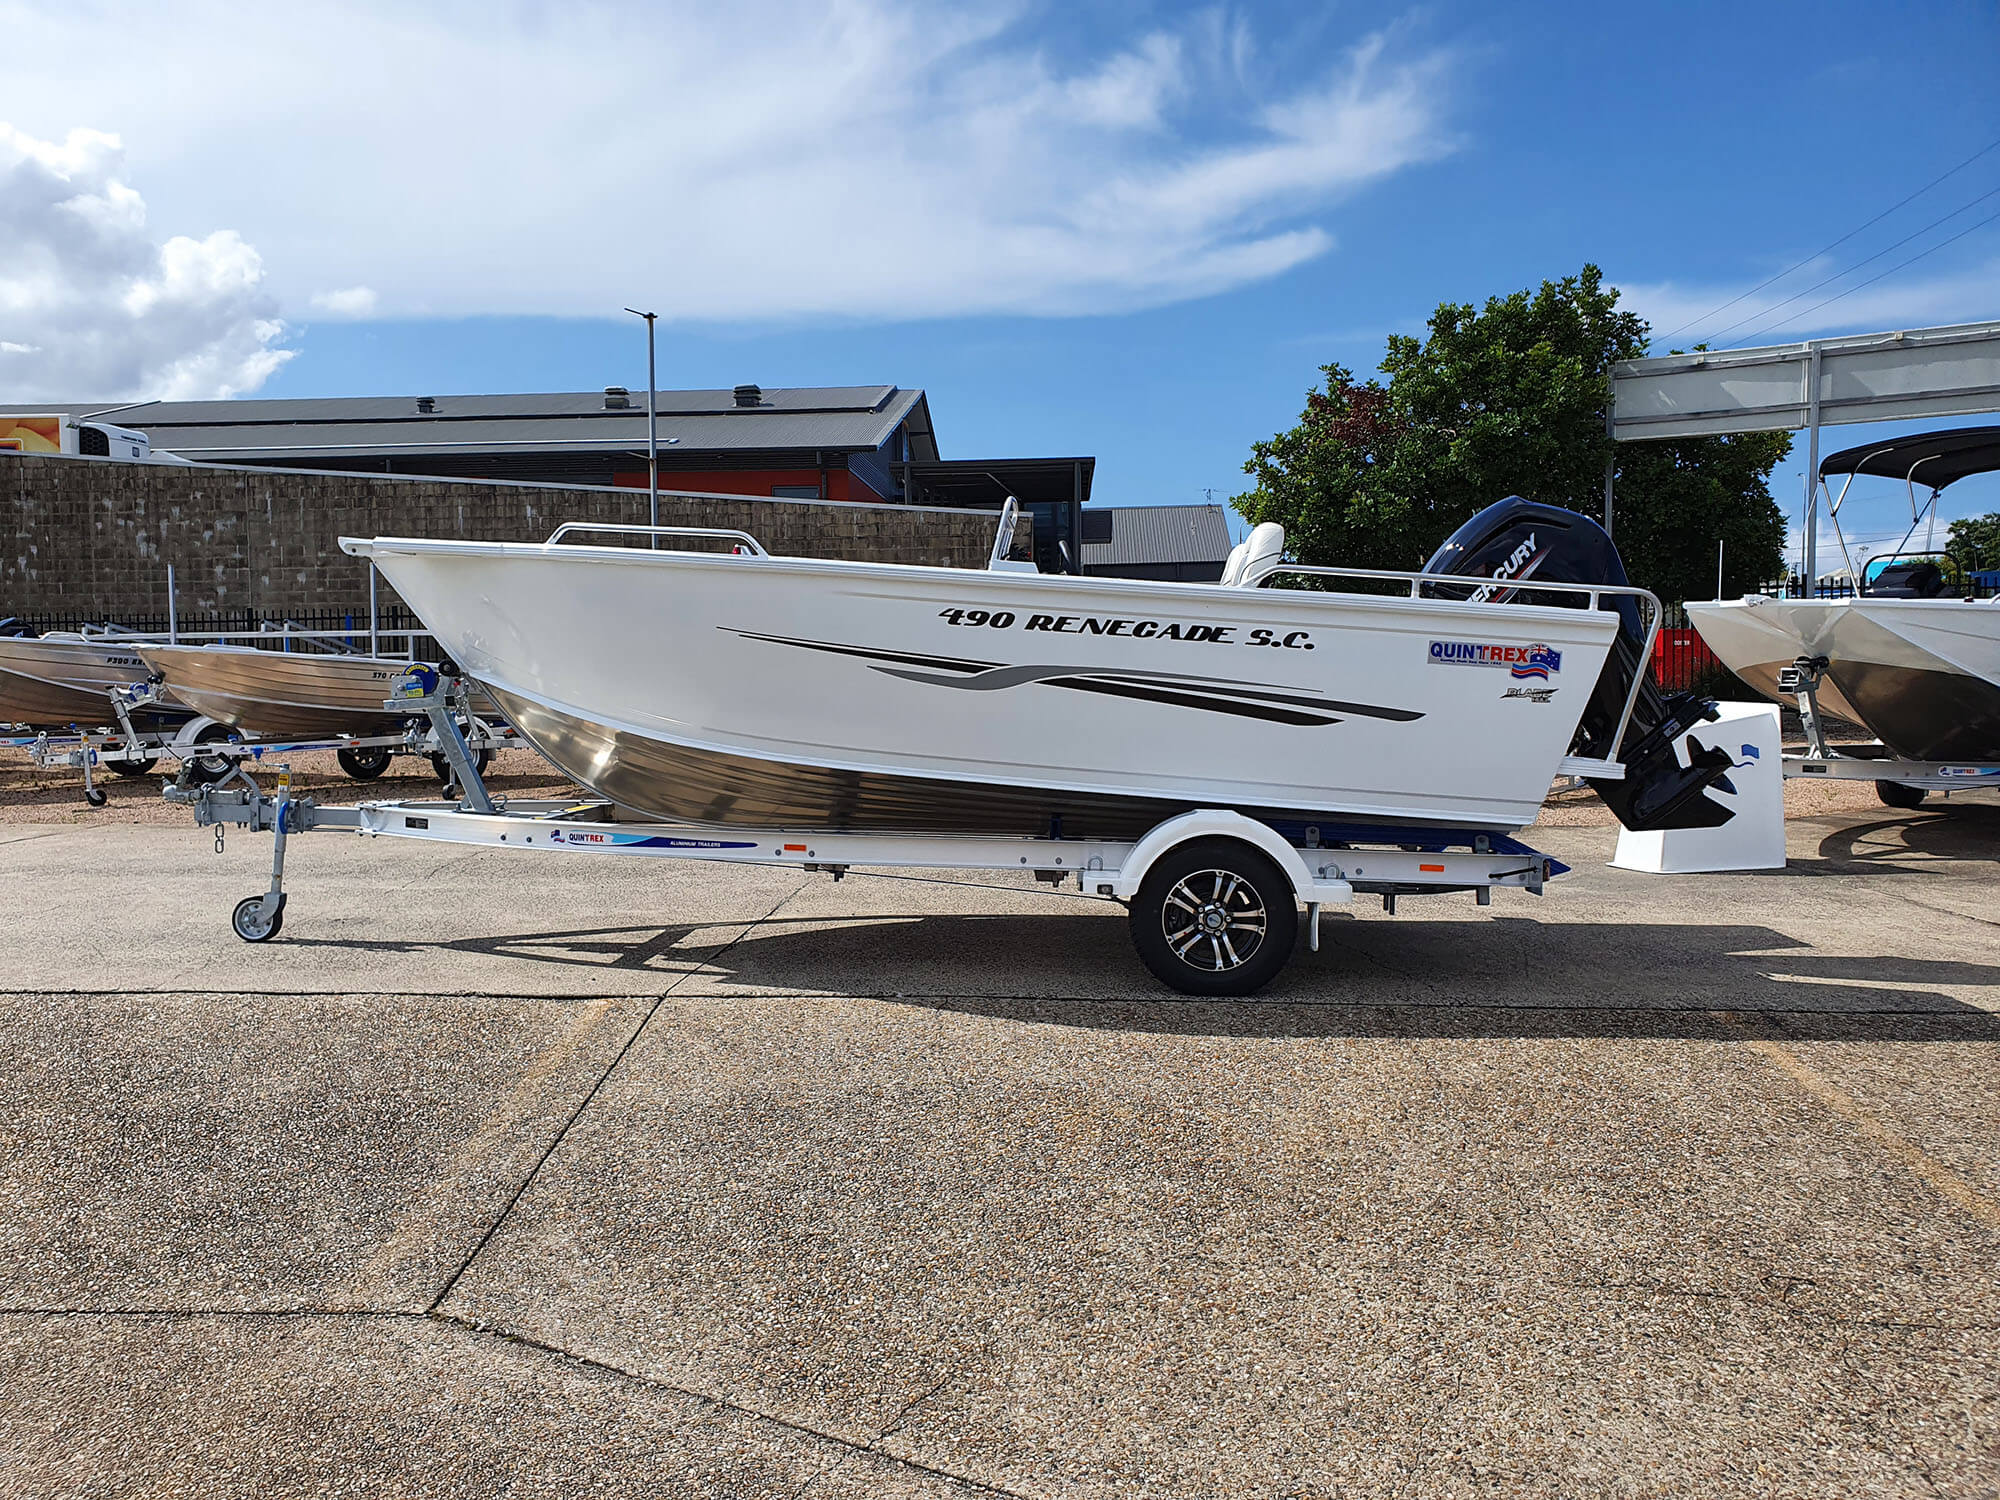 New Quintrex 490 Renegade Side Console - Caloundra Marine Boats & Services